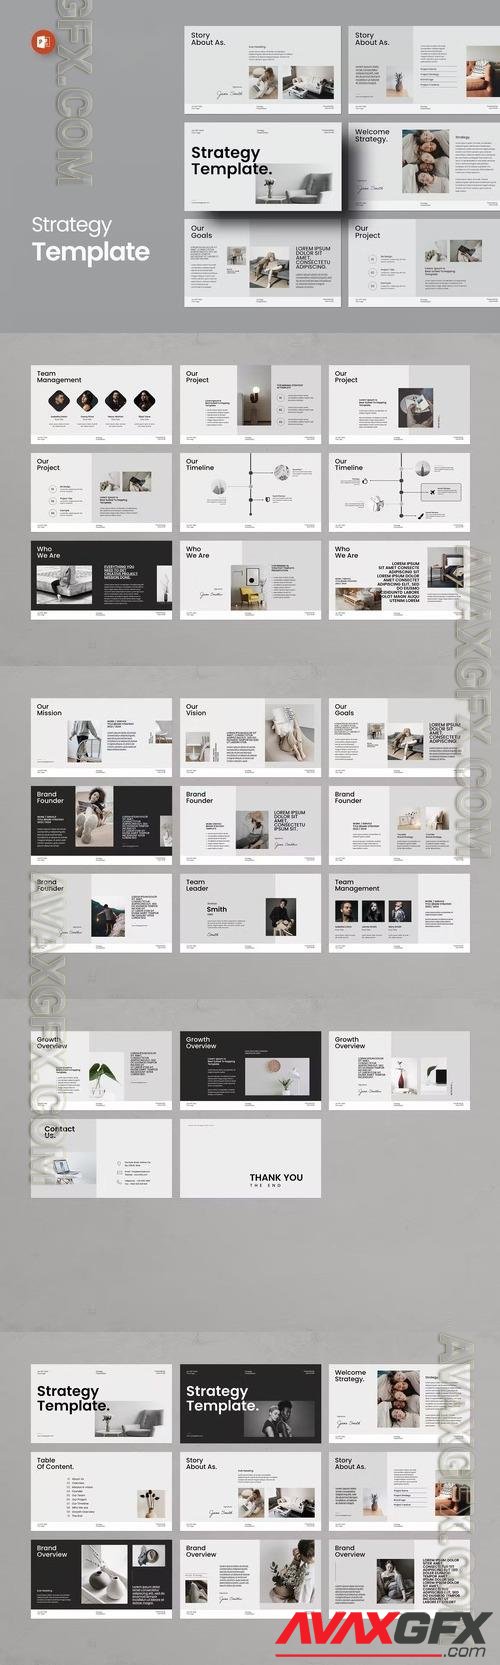 Business Strategy PowerPoint Presentation Template [PPTX]